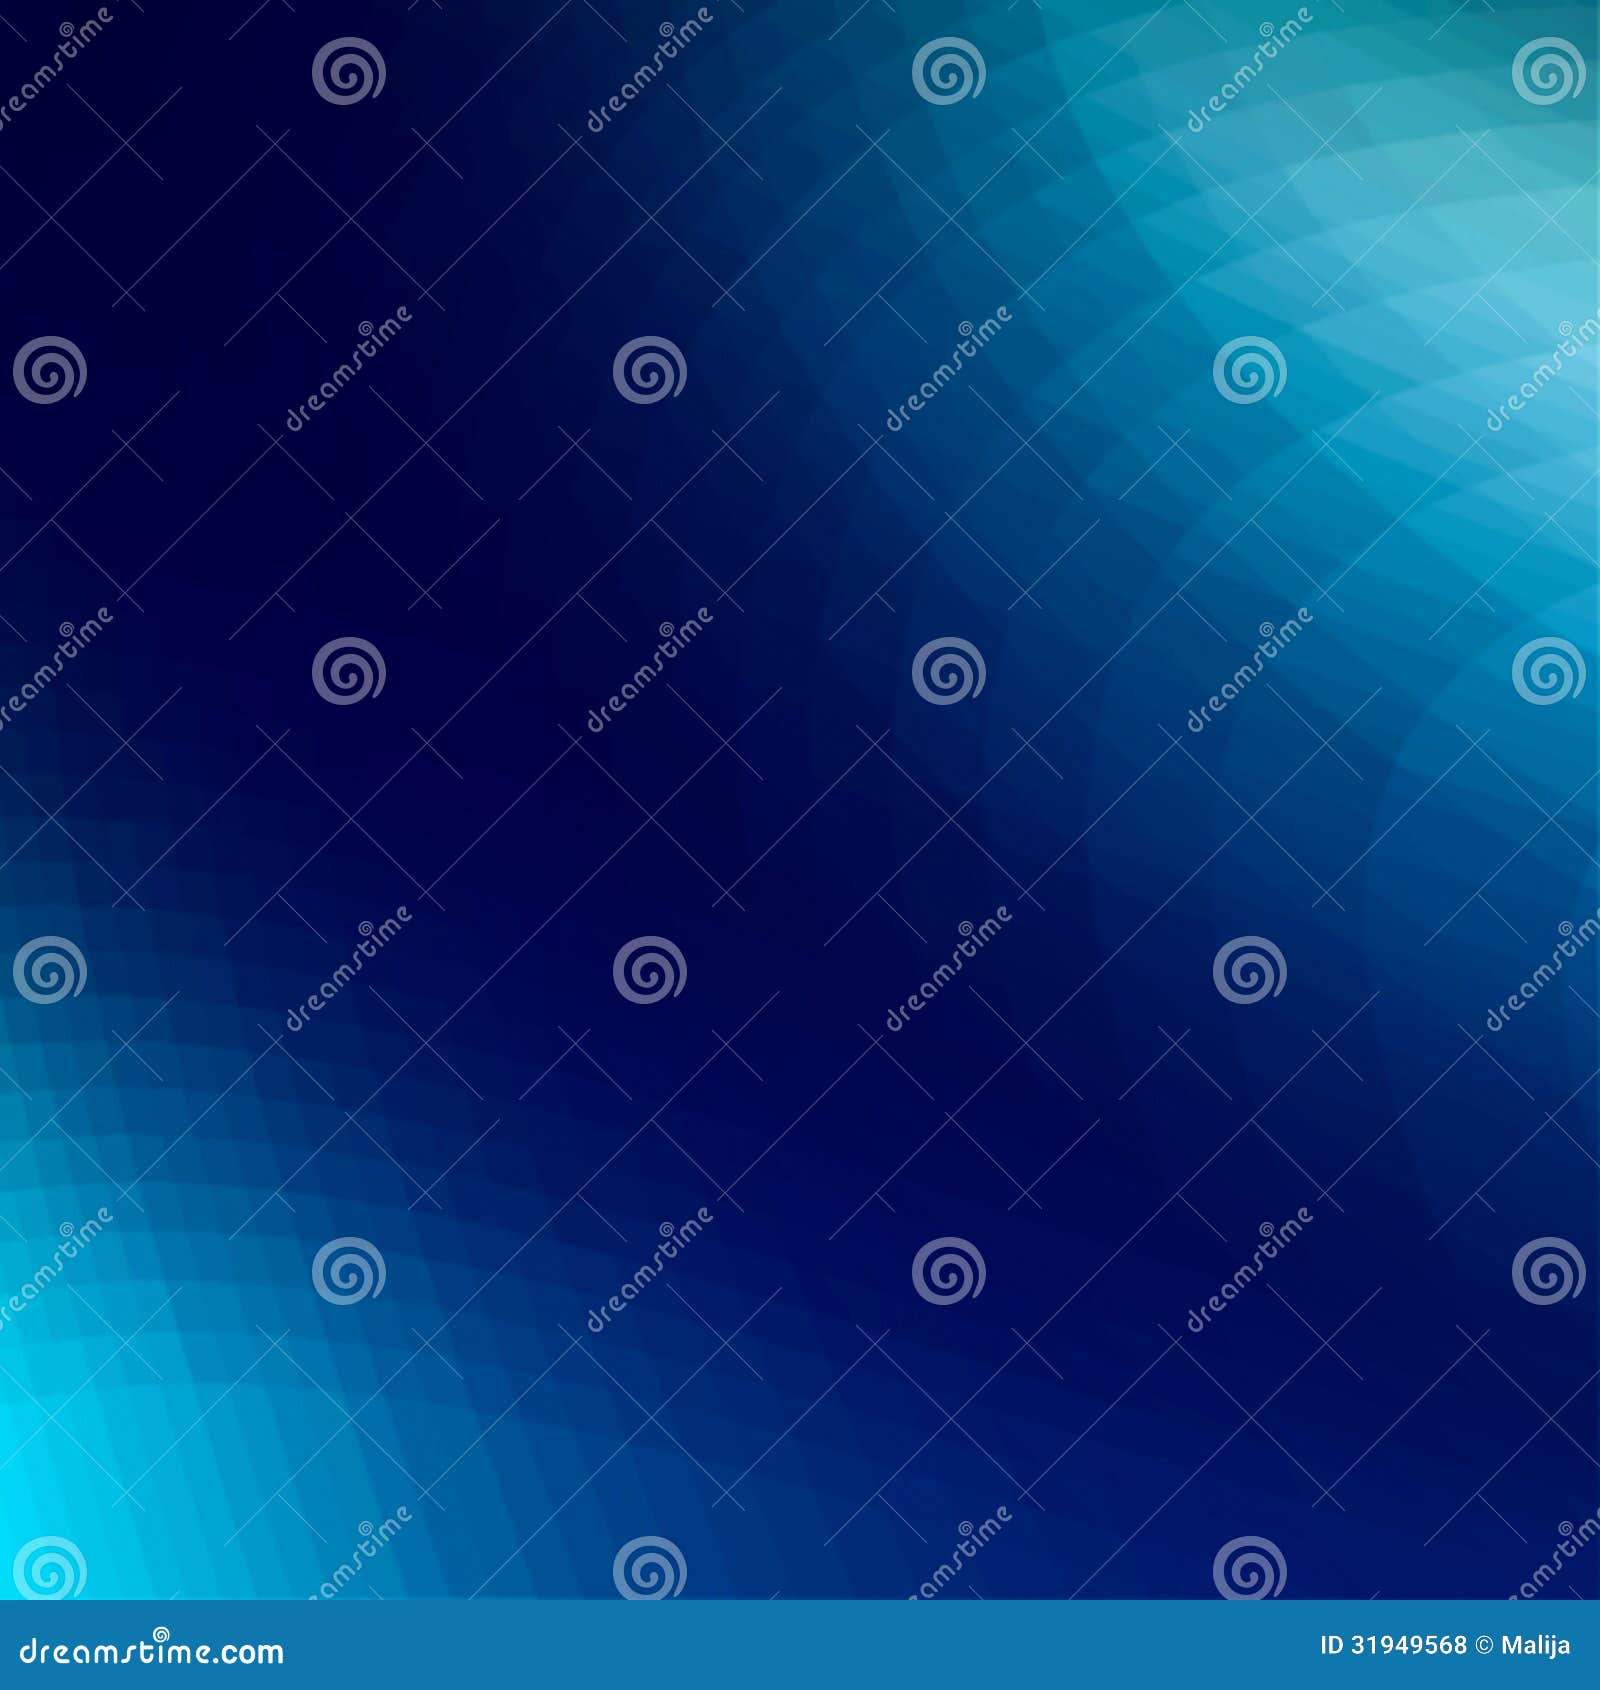 Abstract blue background stock illustration. Illustration of business ...